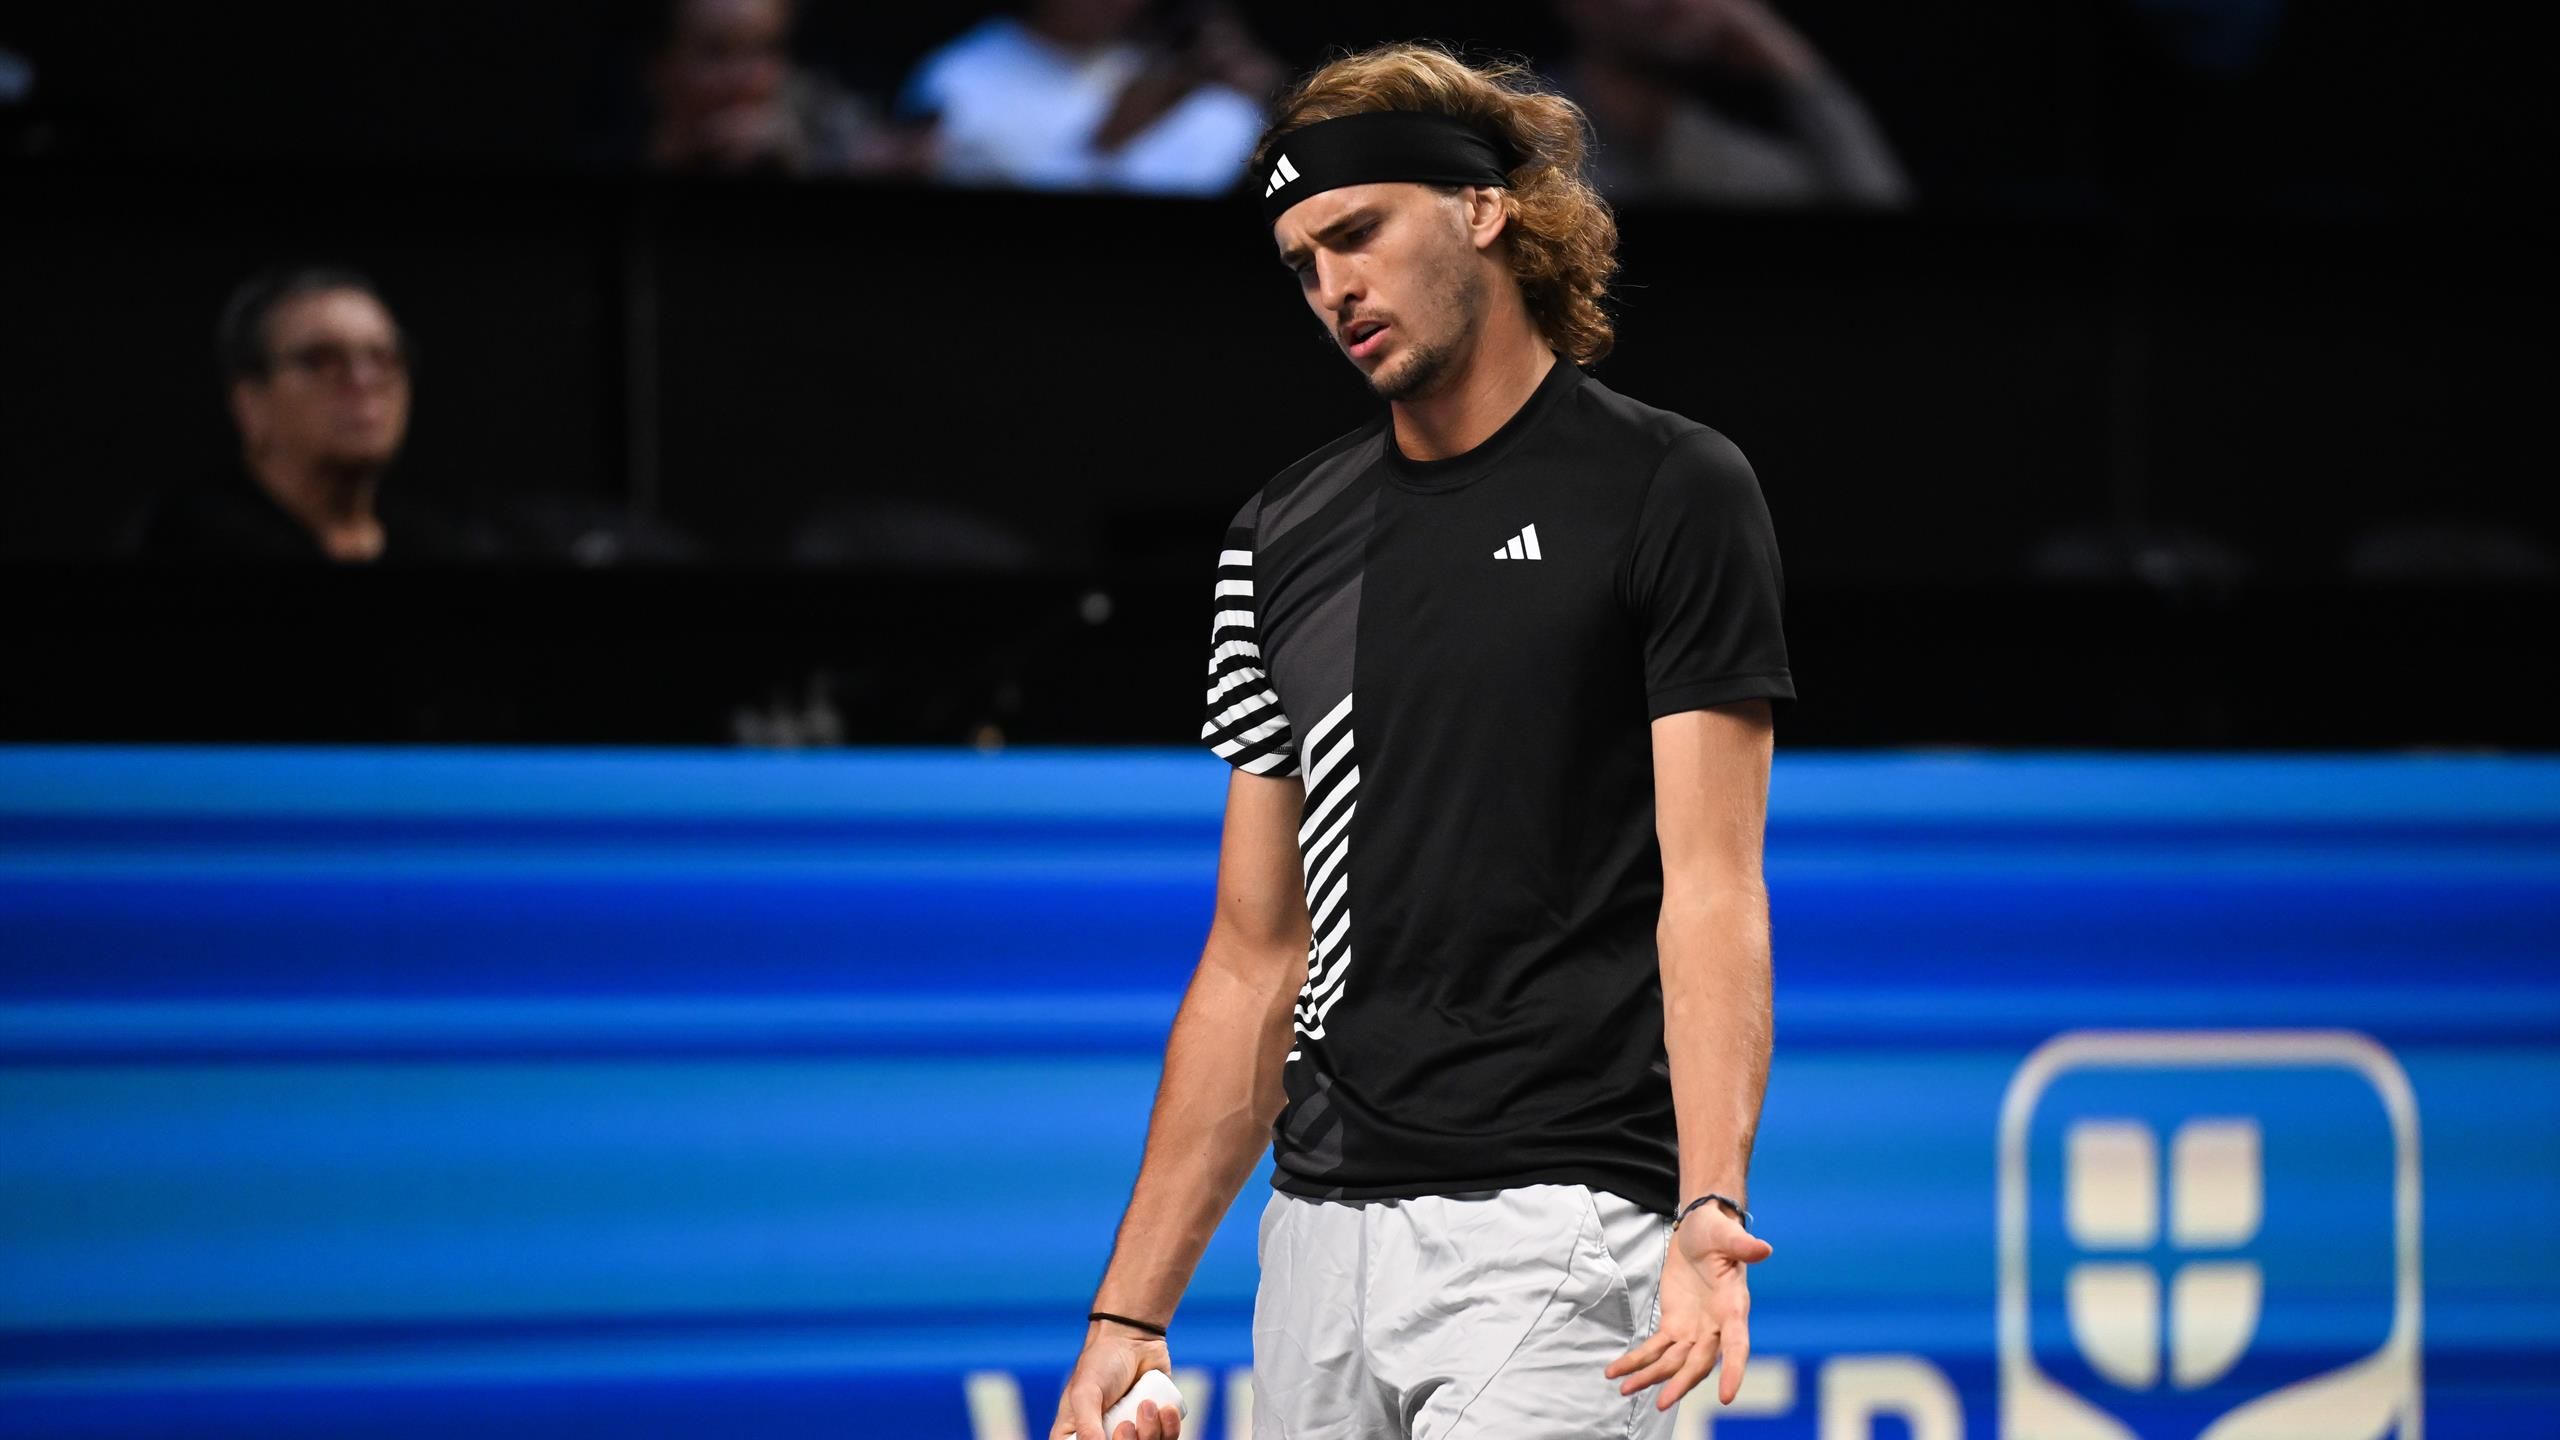 Alexander Zverev failed in the quarterfinals in Vienna against Andrey Rublev – a setback in the battle for the ATP Finals.